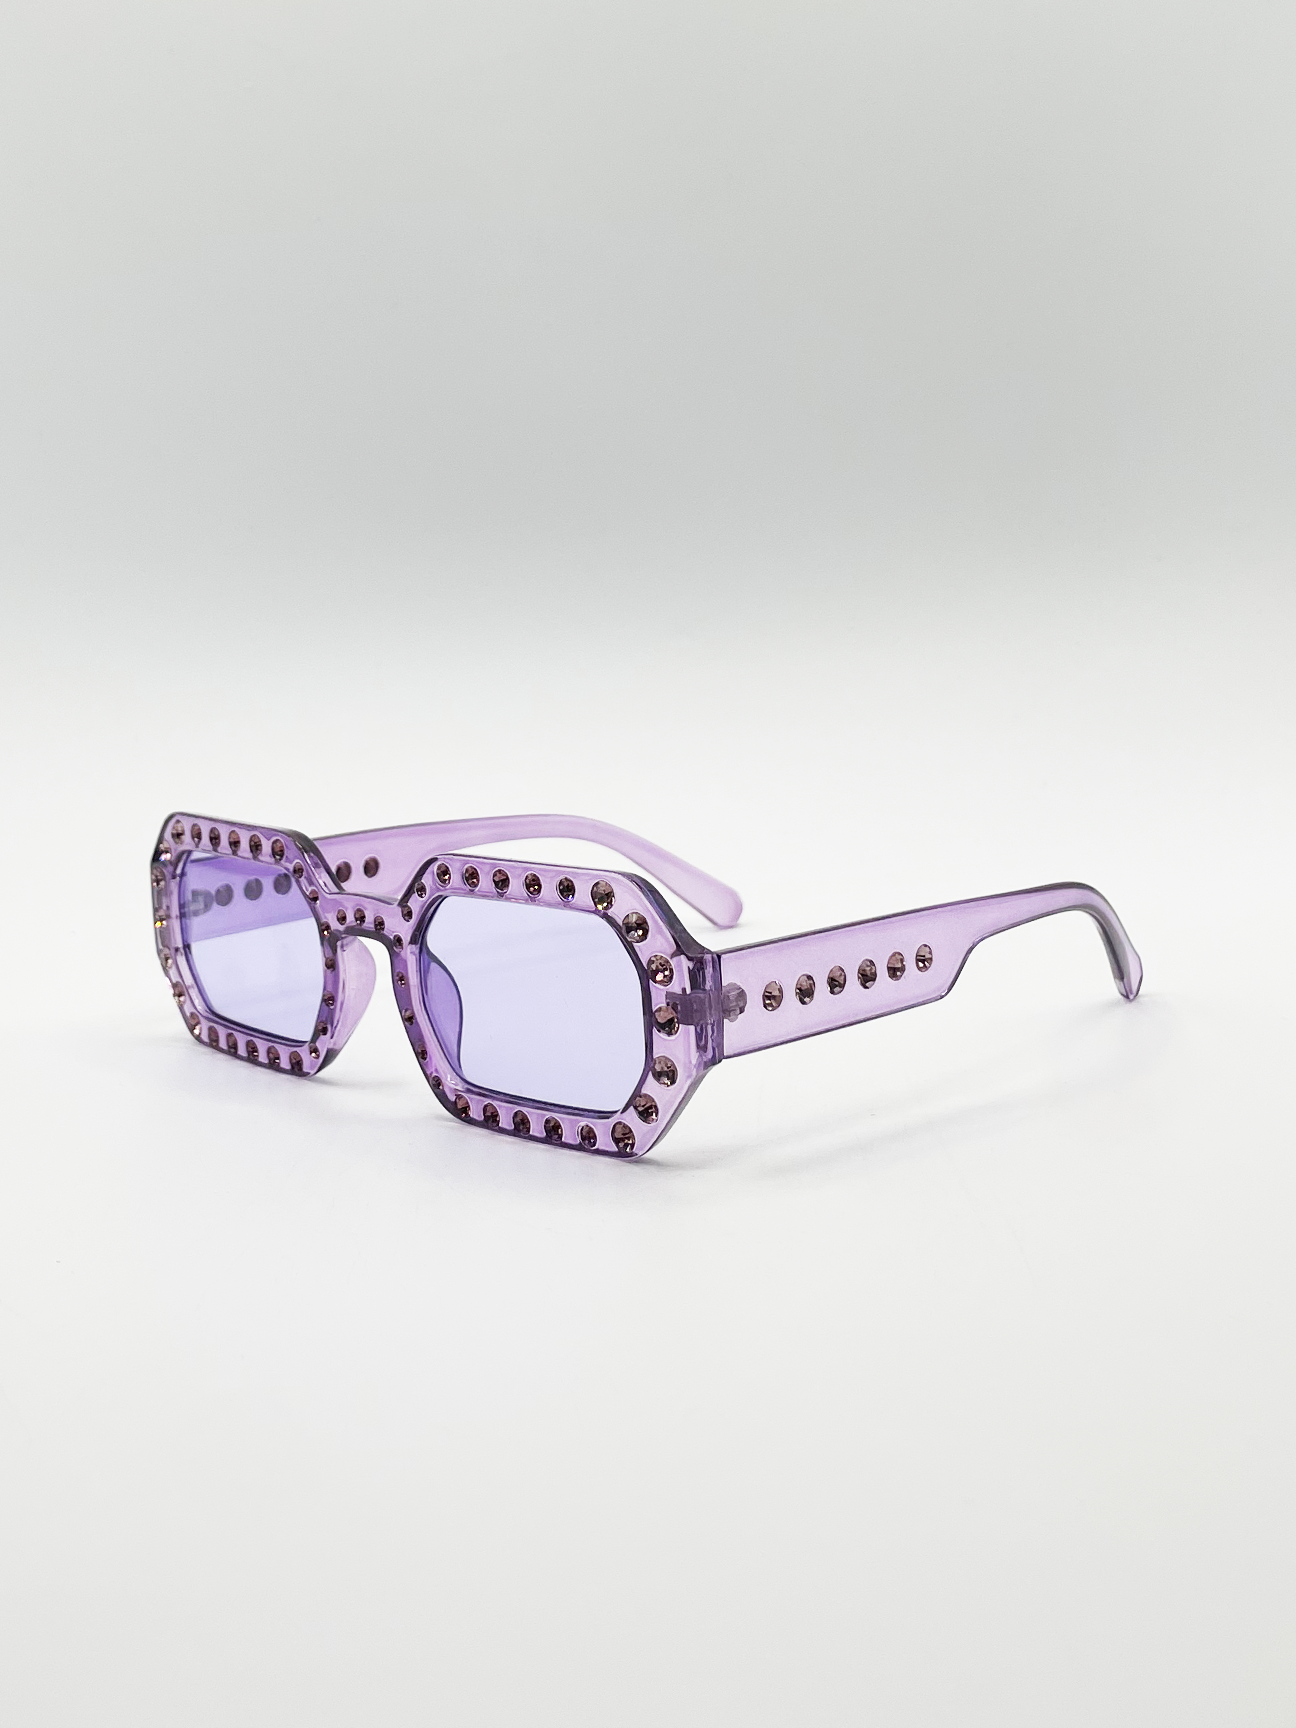 Oval Festival Glasses with Gem Detail in Purple